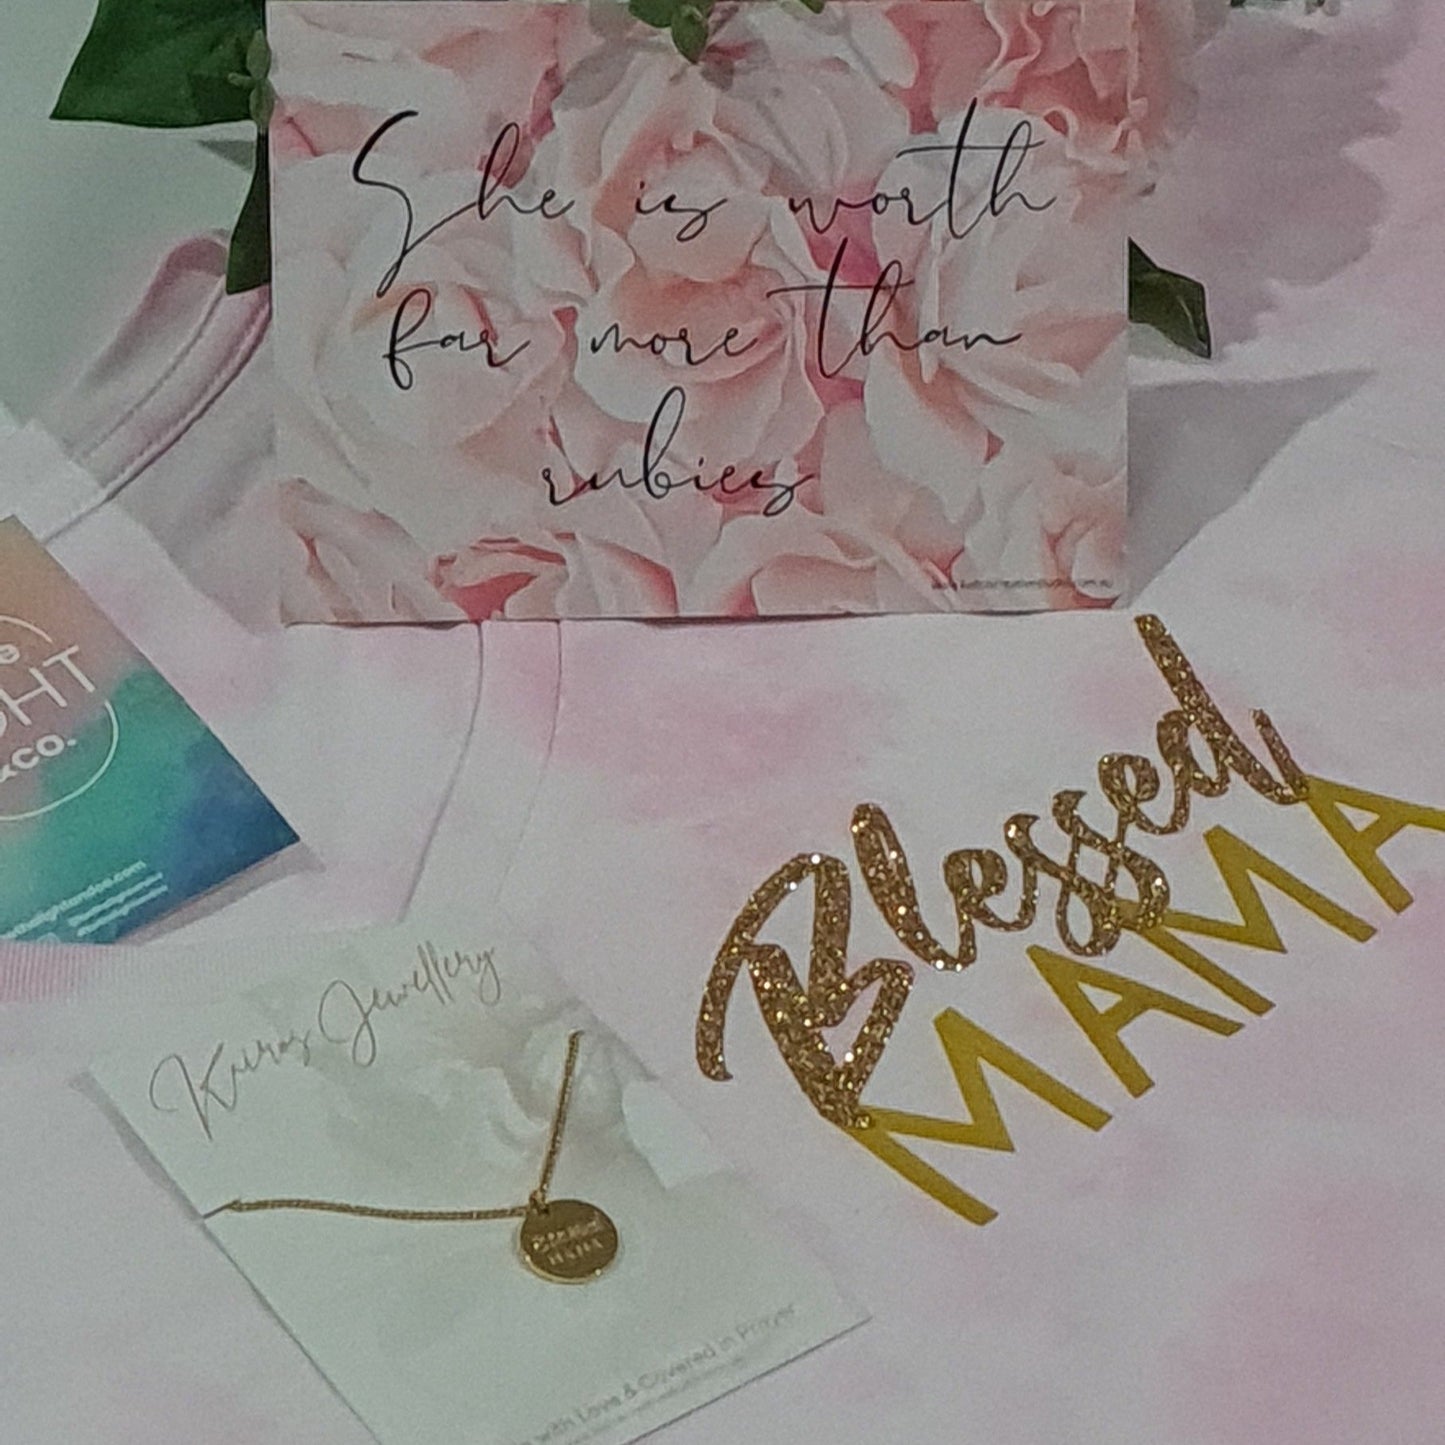 Blessed Mama Shirt and Necklace Bundle - Pink